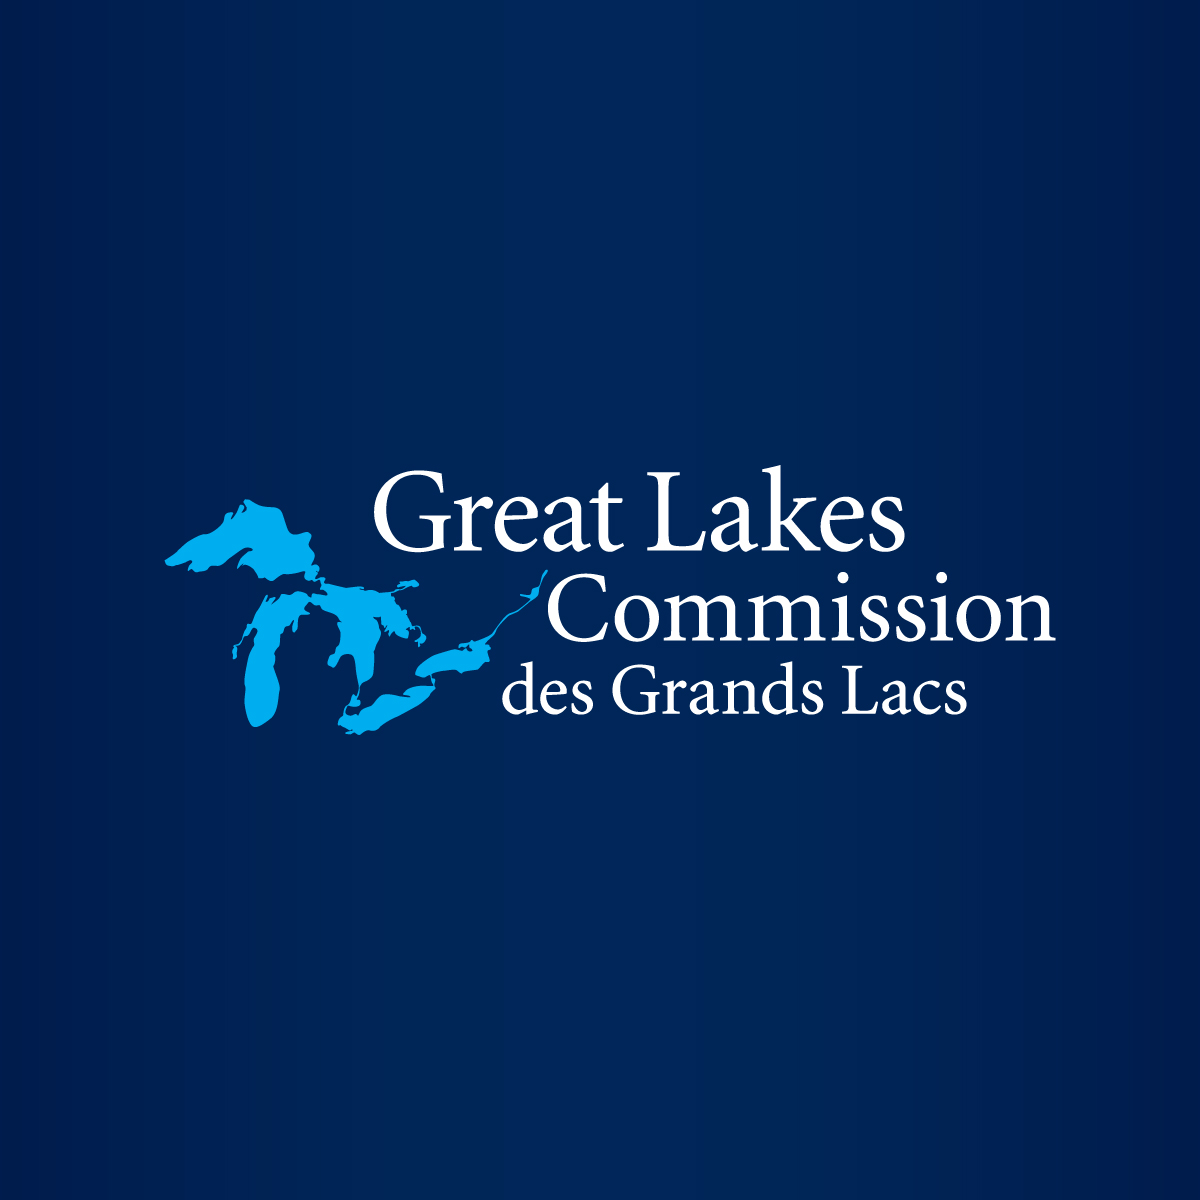 anna tanski to lead pair of great lakes marketing initiatives